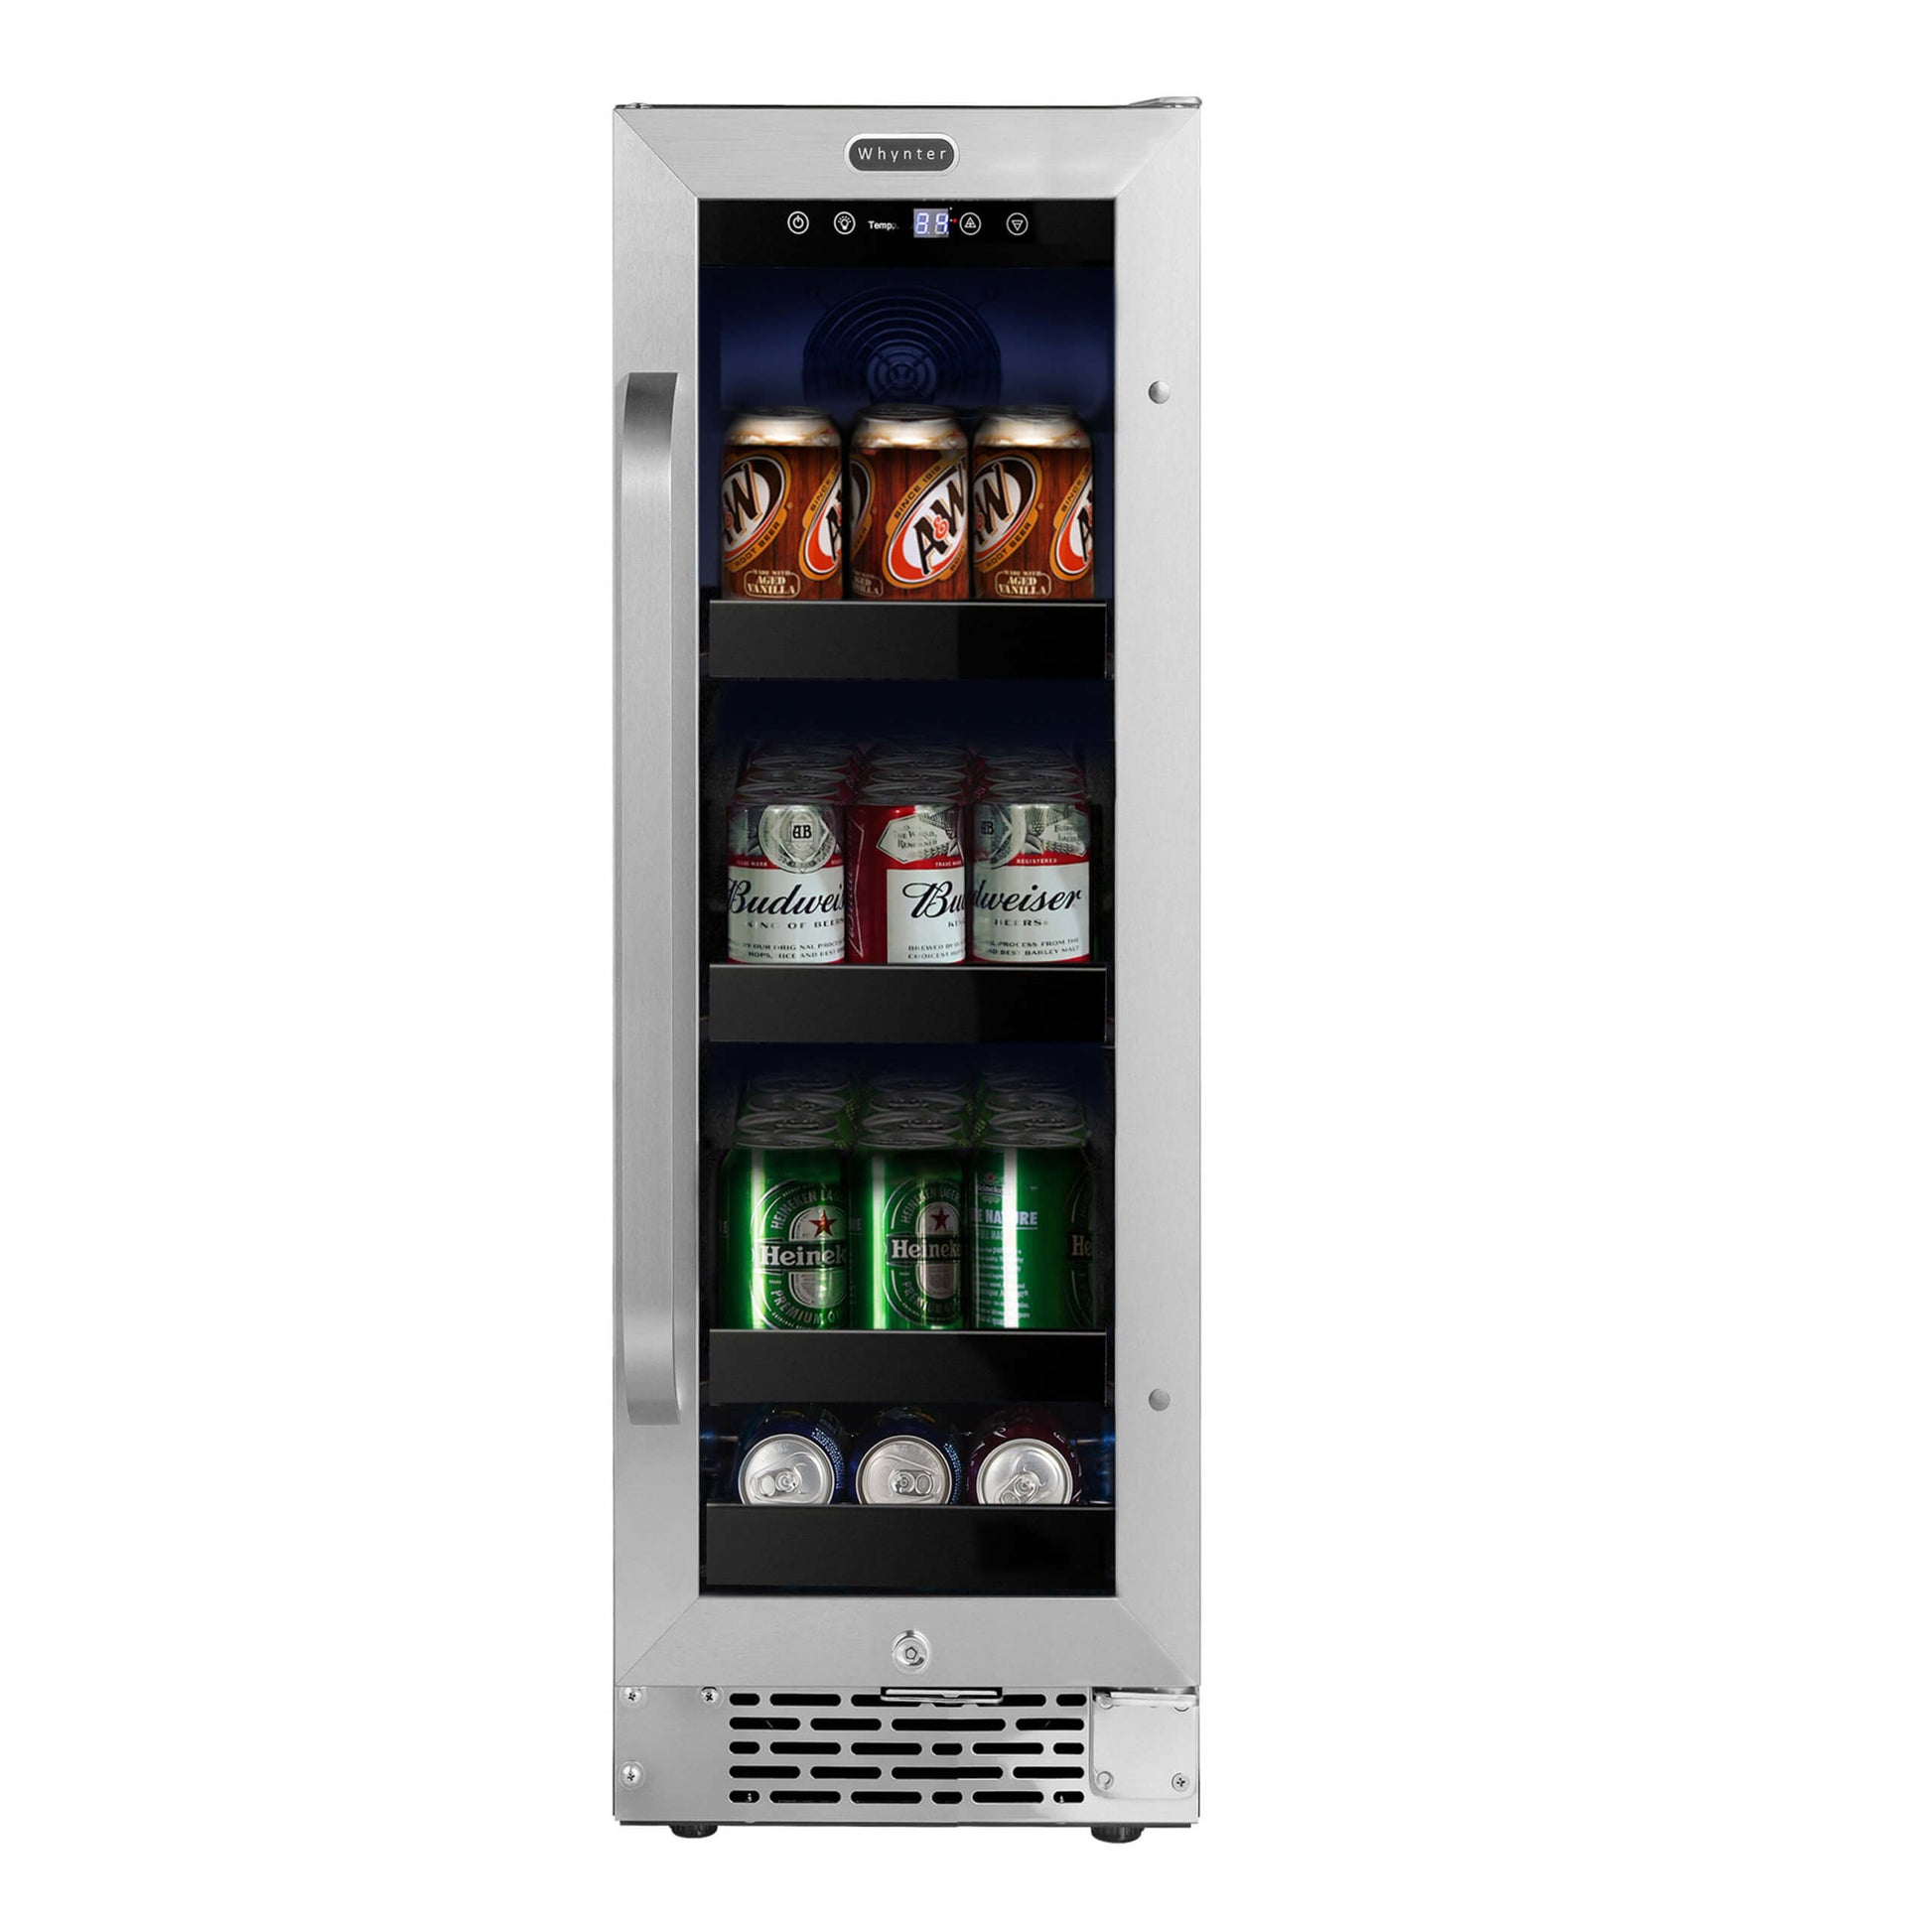 Whynter BBR-638SB 12 inch Built-In 60 Can Undercounter Stainless Steel Beverage Refrigerator with Reversible Door, Digital Control, Lock and Carbon Filter